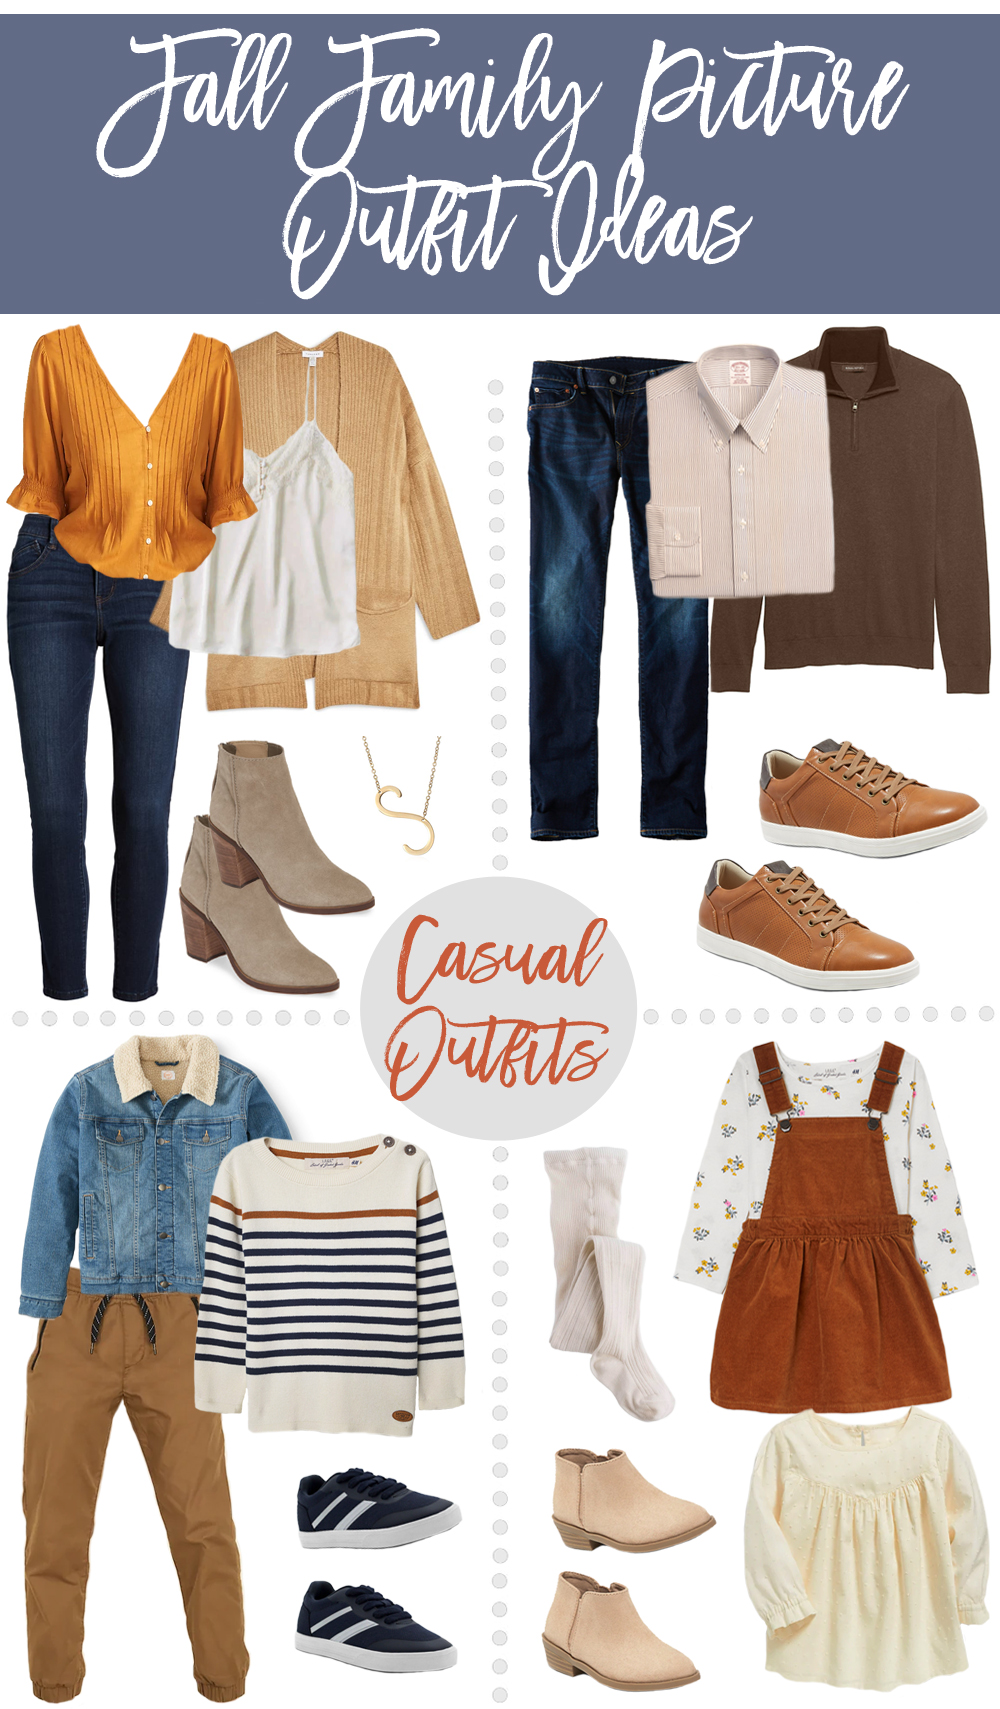 2019 fall outfits